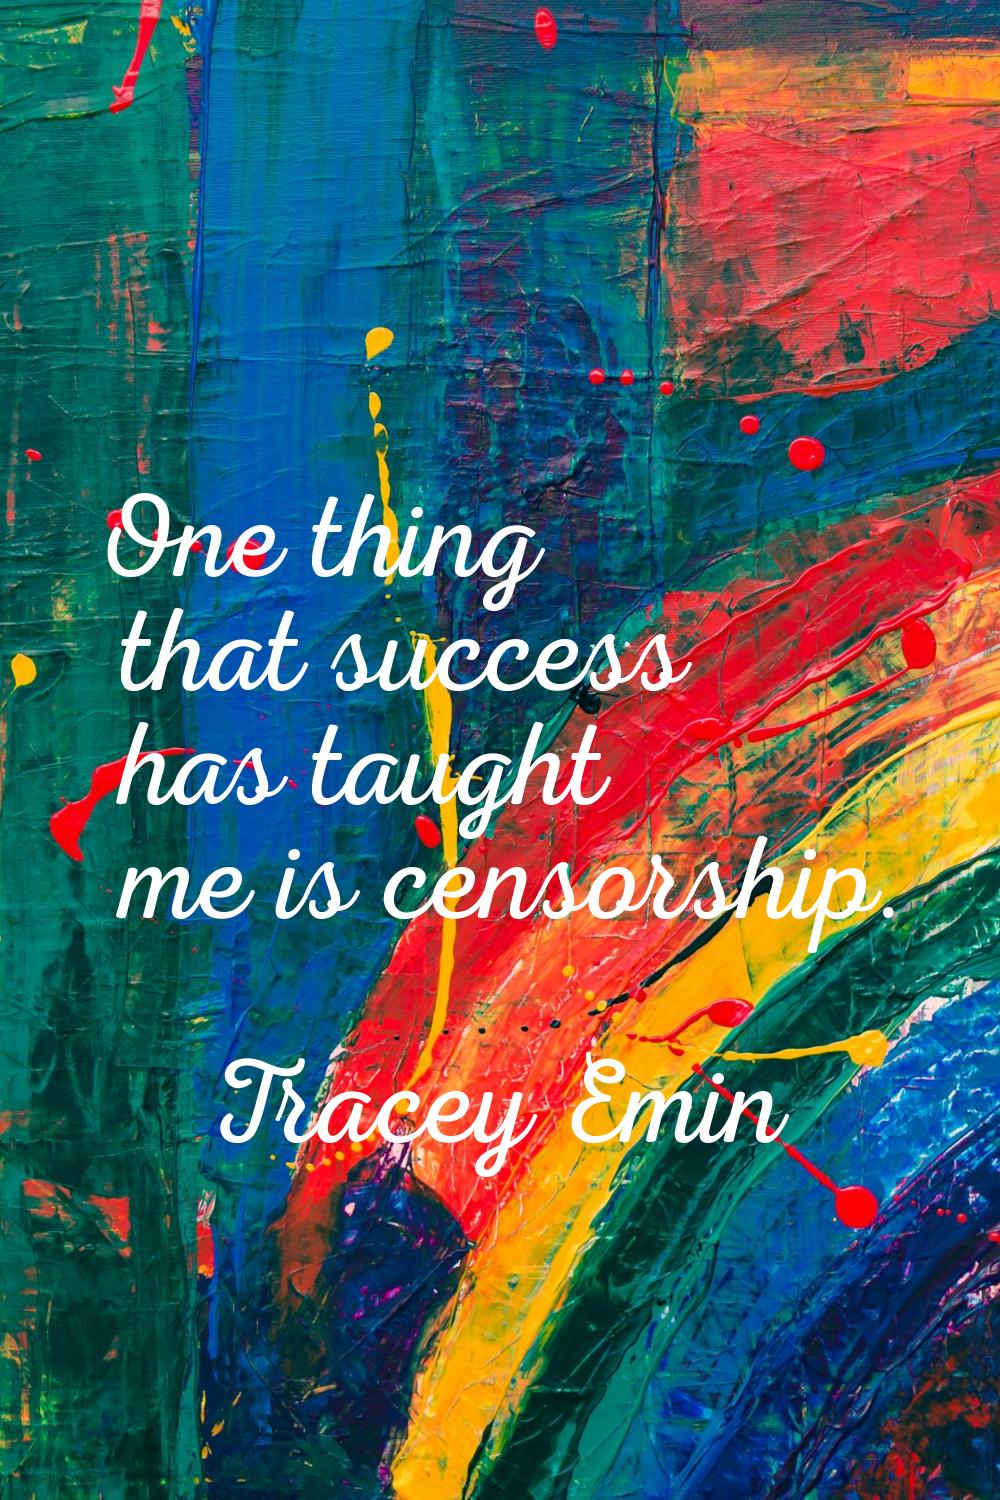 One thing that success has taught me is censorship.